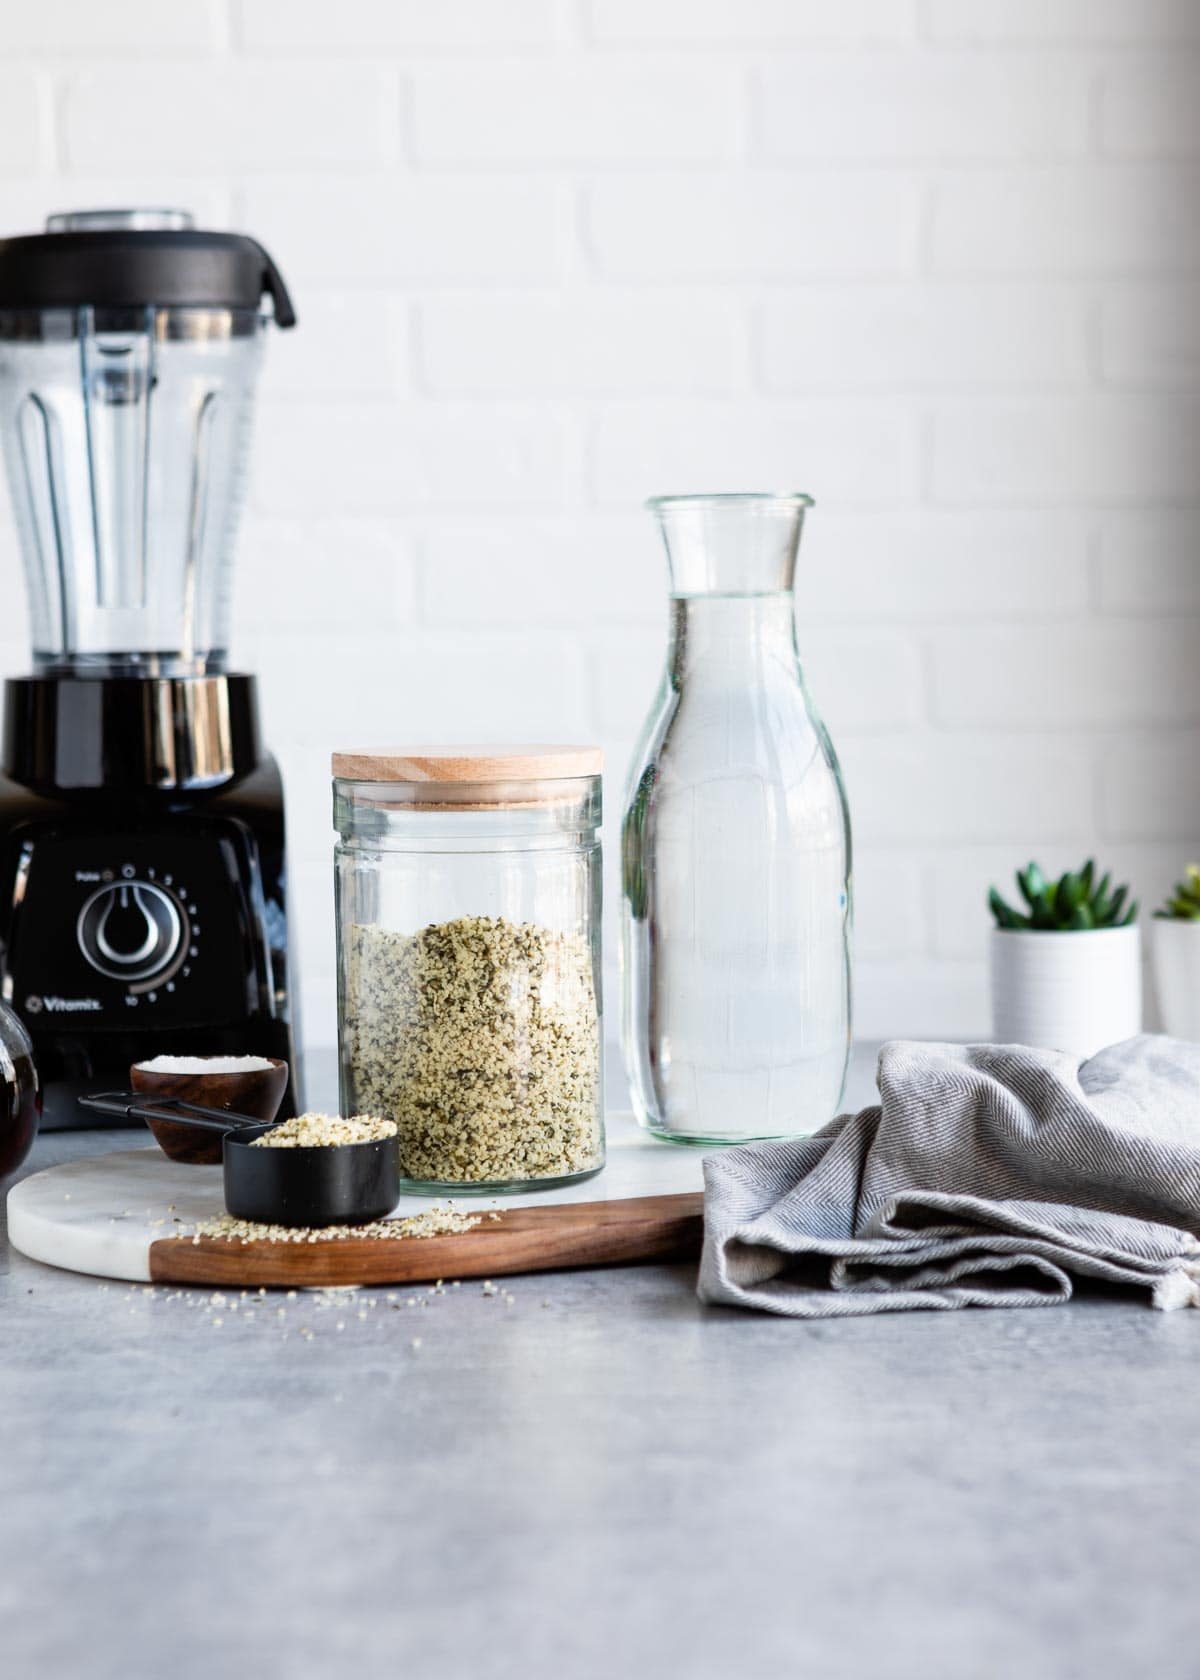 hemp hearts and water on a counter with a blender in the background.